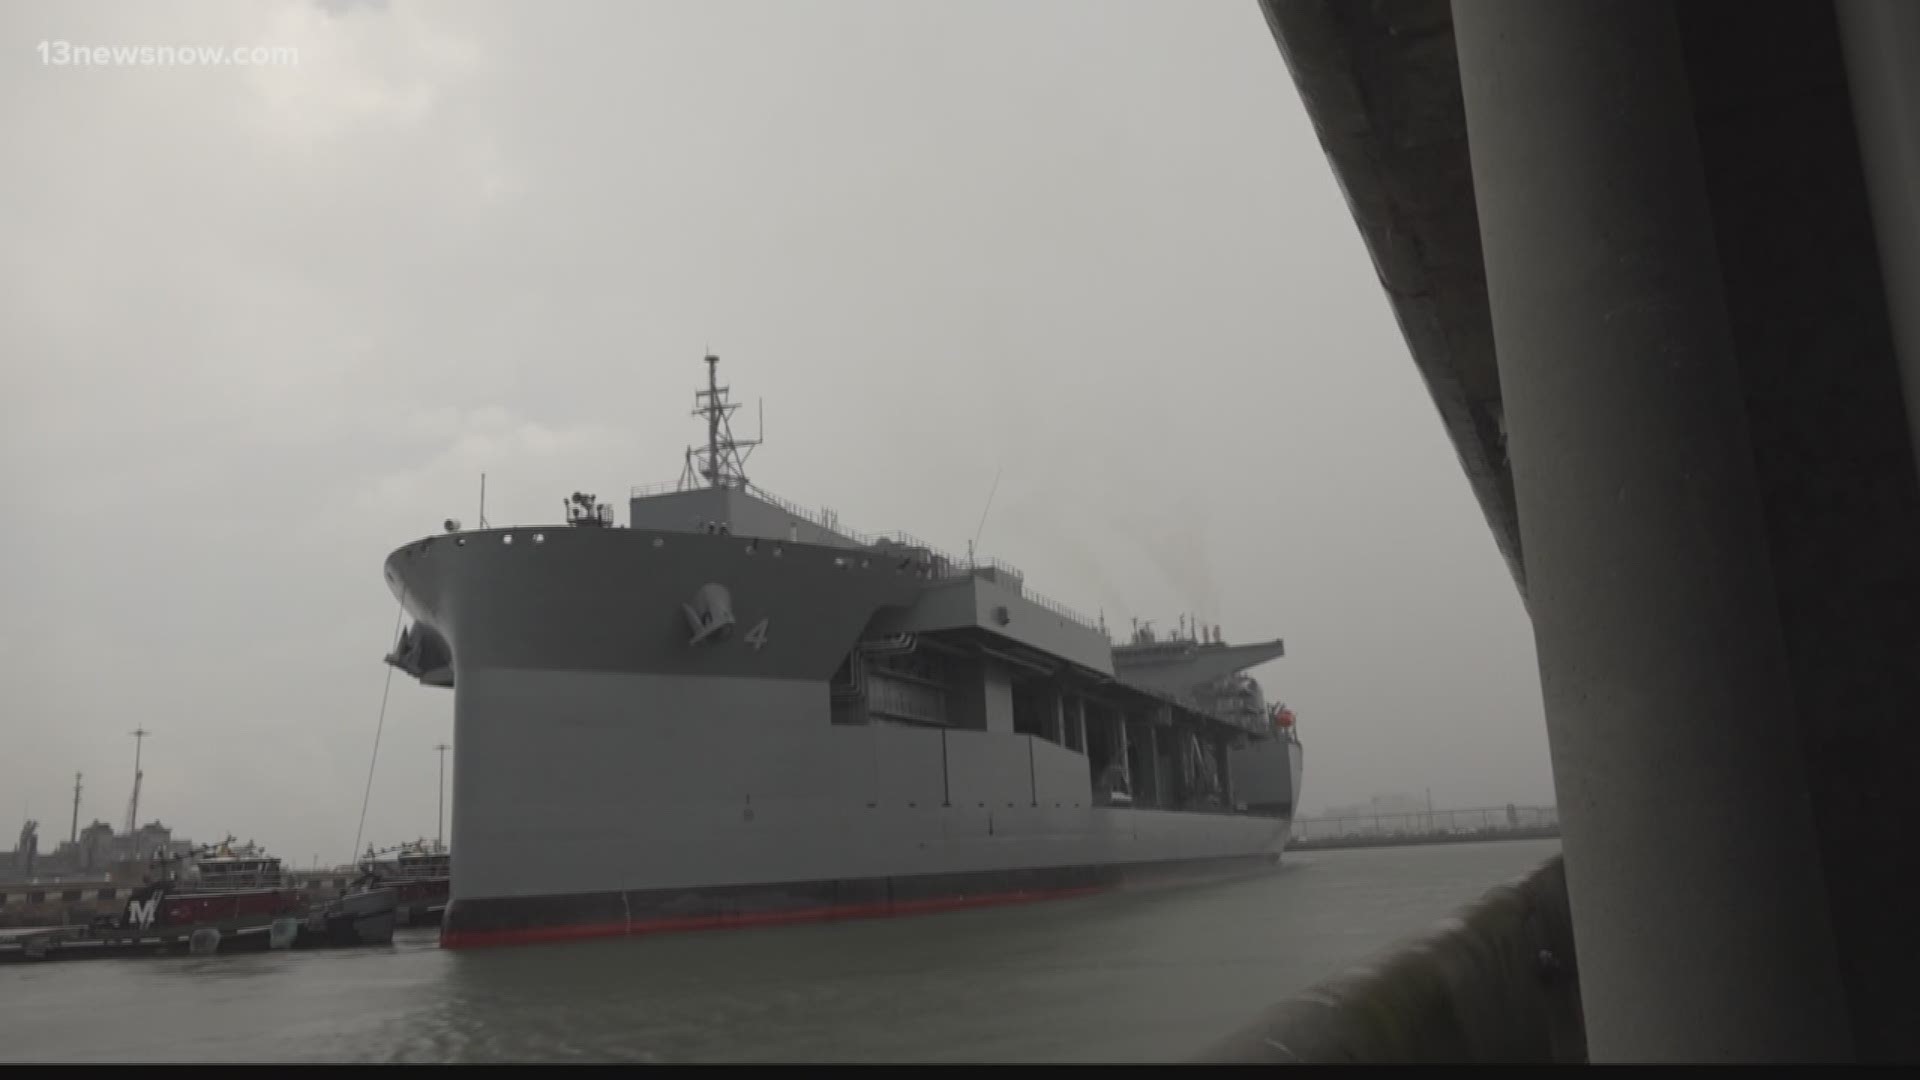 The USNS Hershel "Woody" Williams arrived at Naval Station Norfolk Thursday after completing its maiden voyage from San Diego. It is the Navy's newest expeditionary sea base.